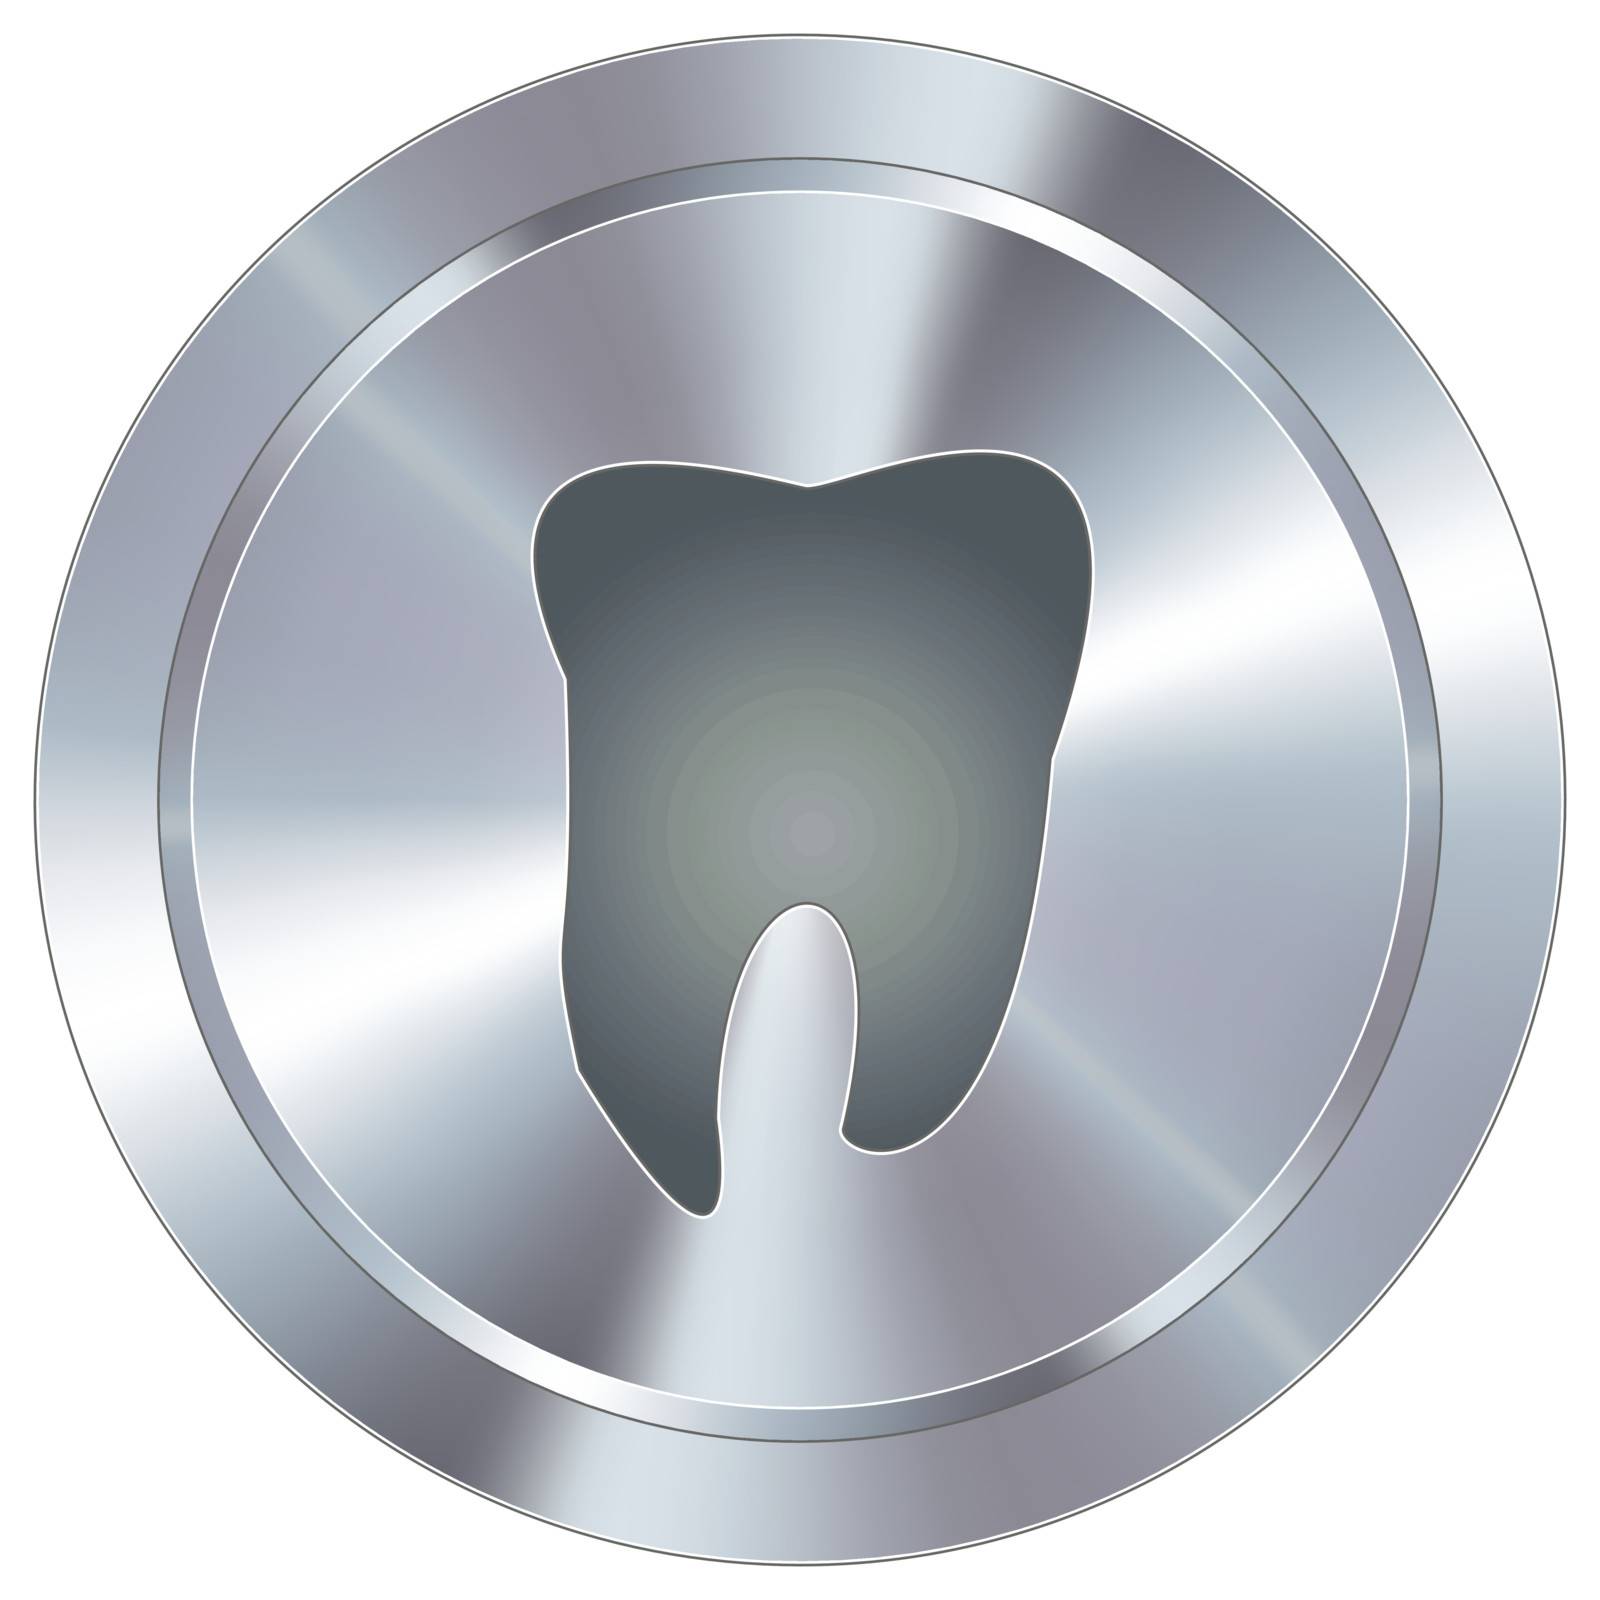 Tooth or dentist icon on round stainless steel modern industrial button